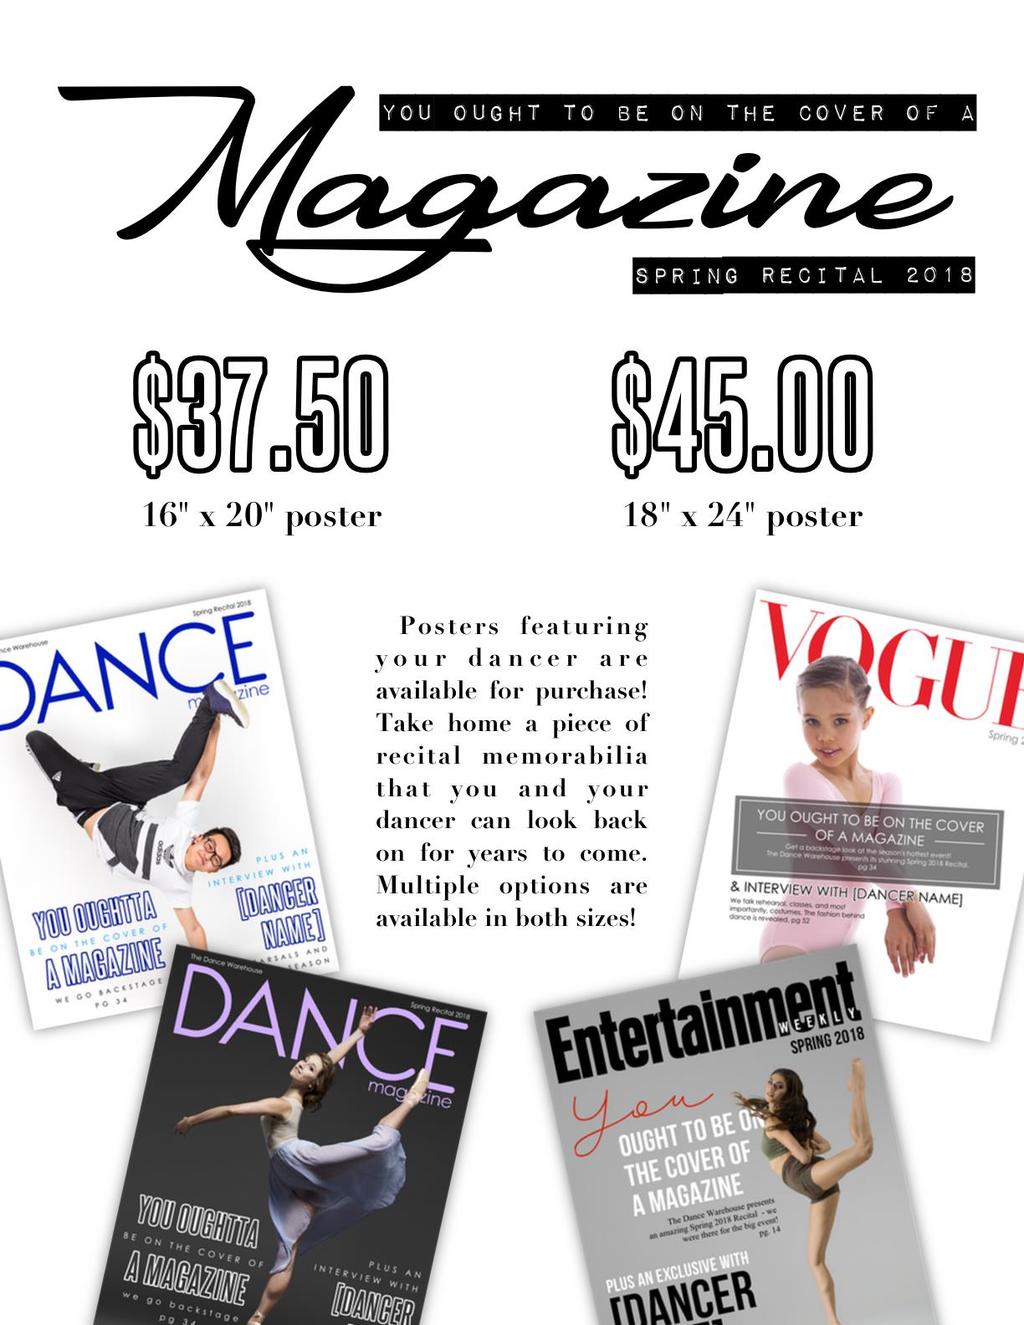 Don t miss out on your chance to actually be On the Cover of a Magazine!